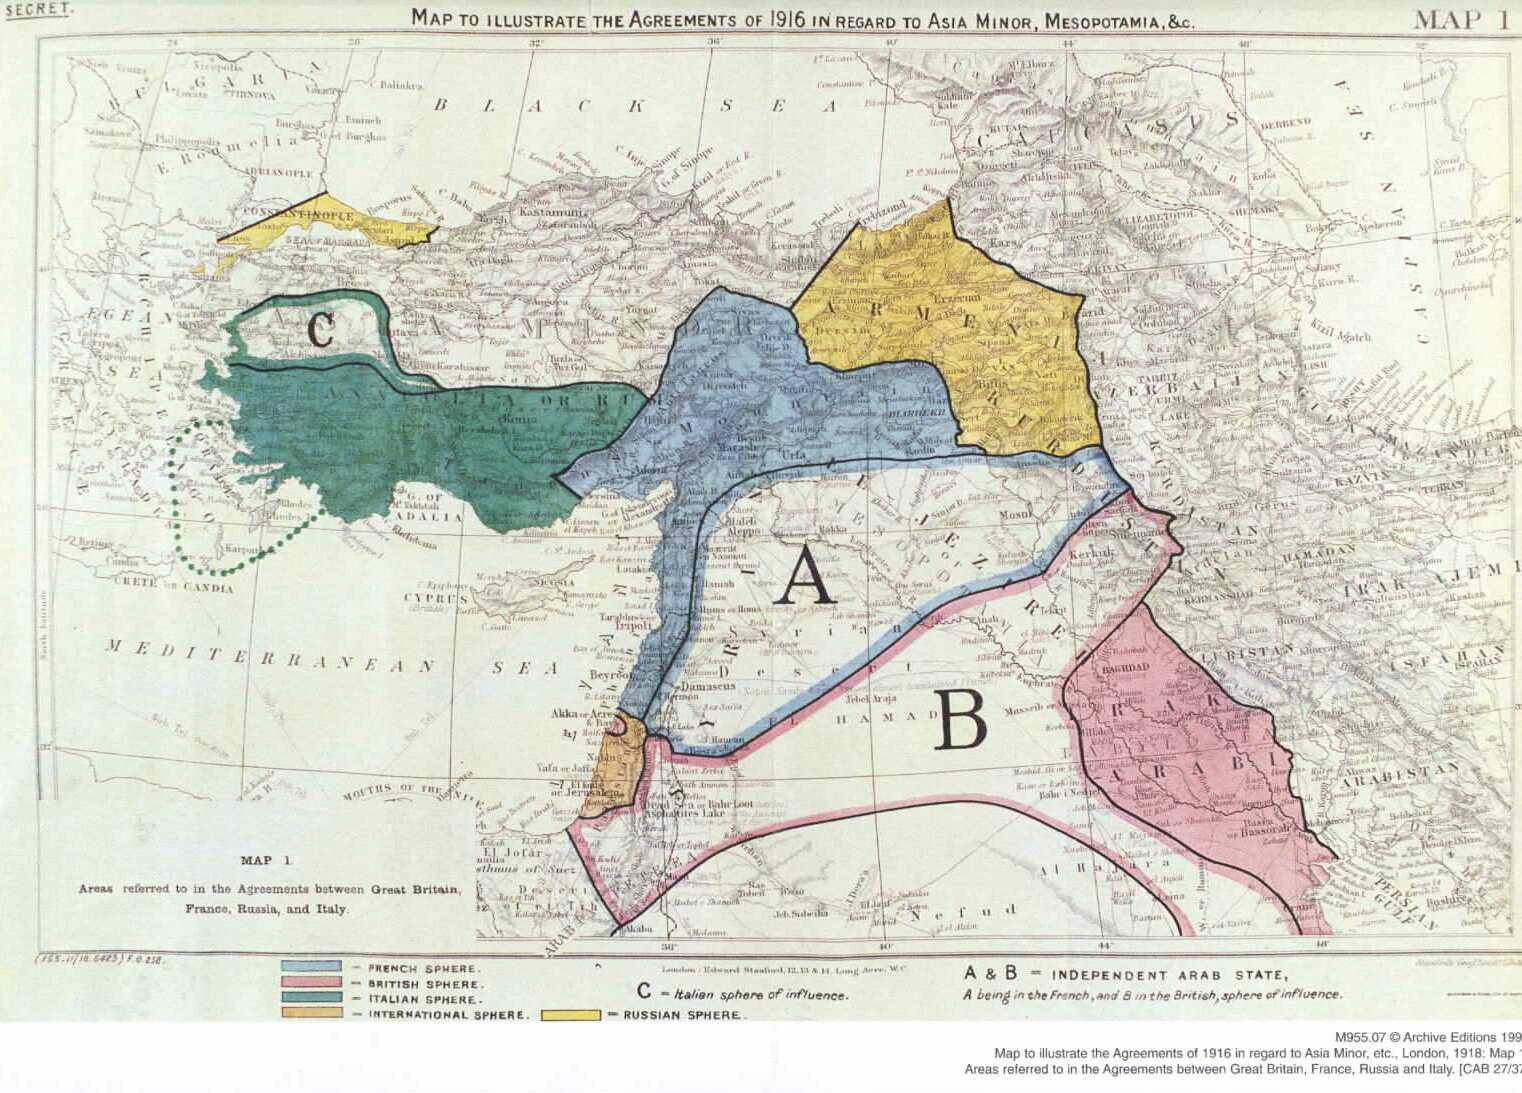 1919: The Sykes-Picot Agreement